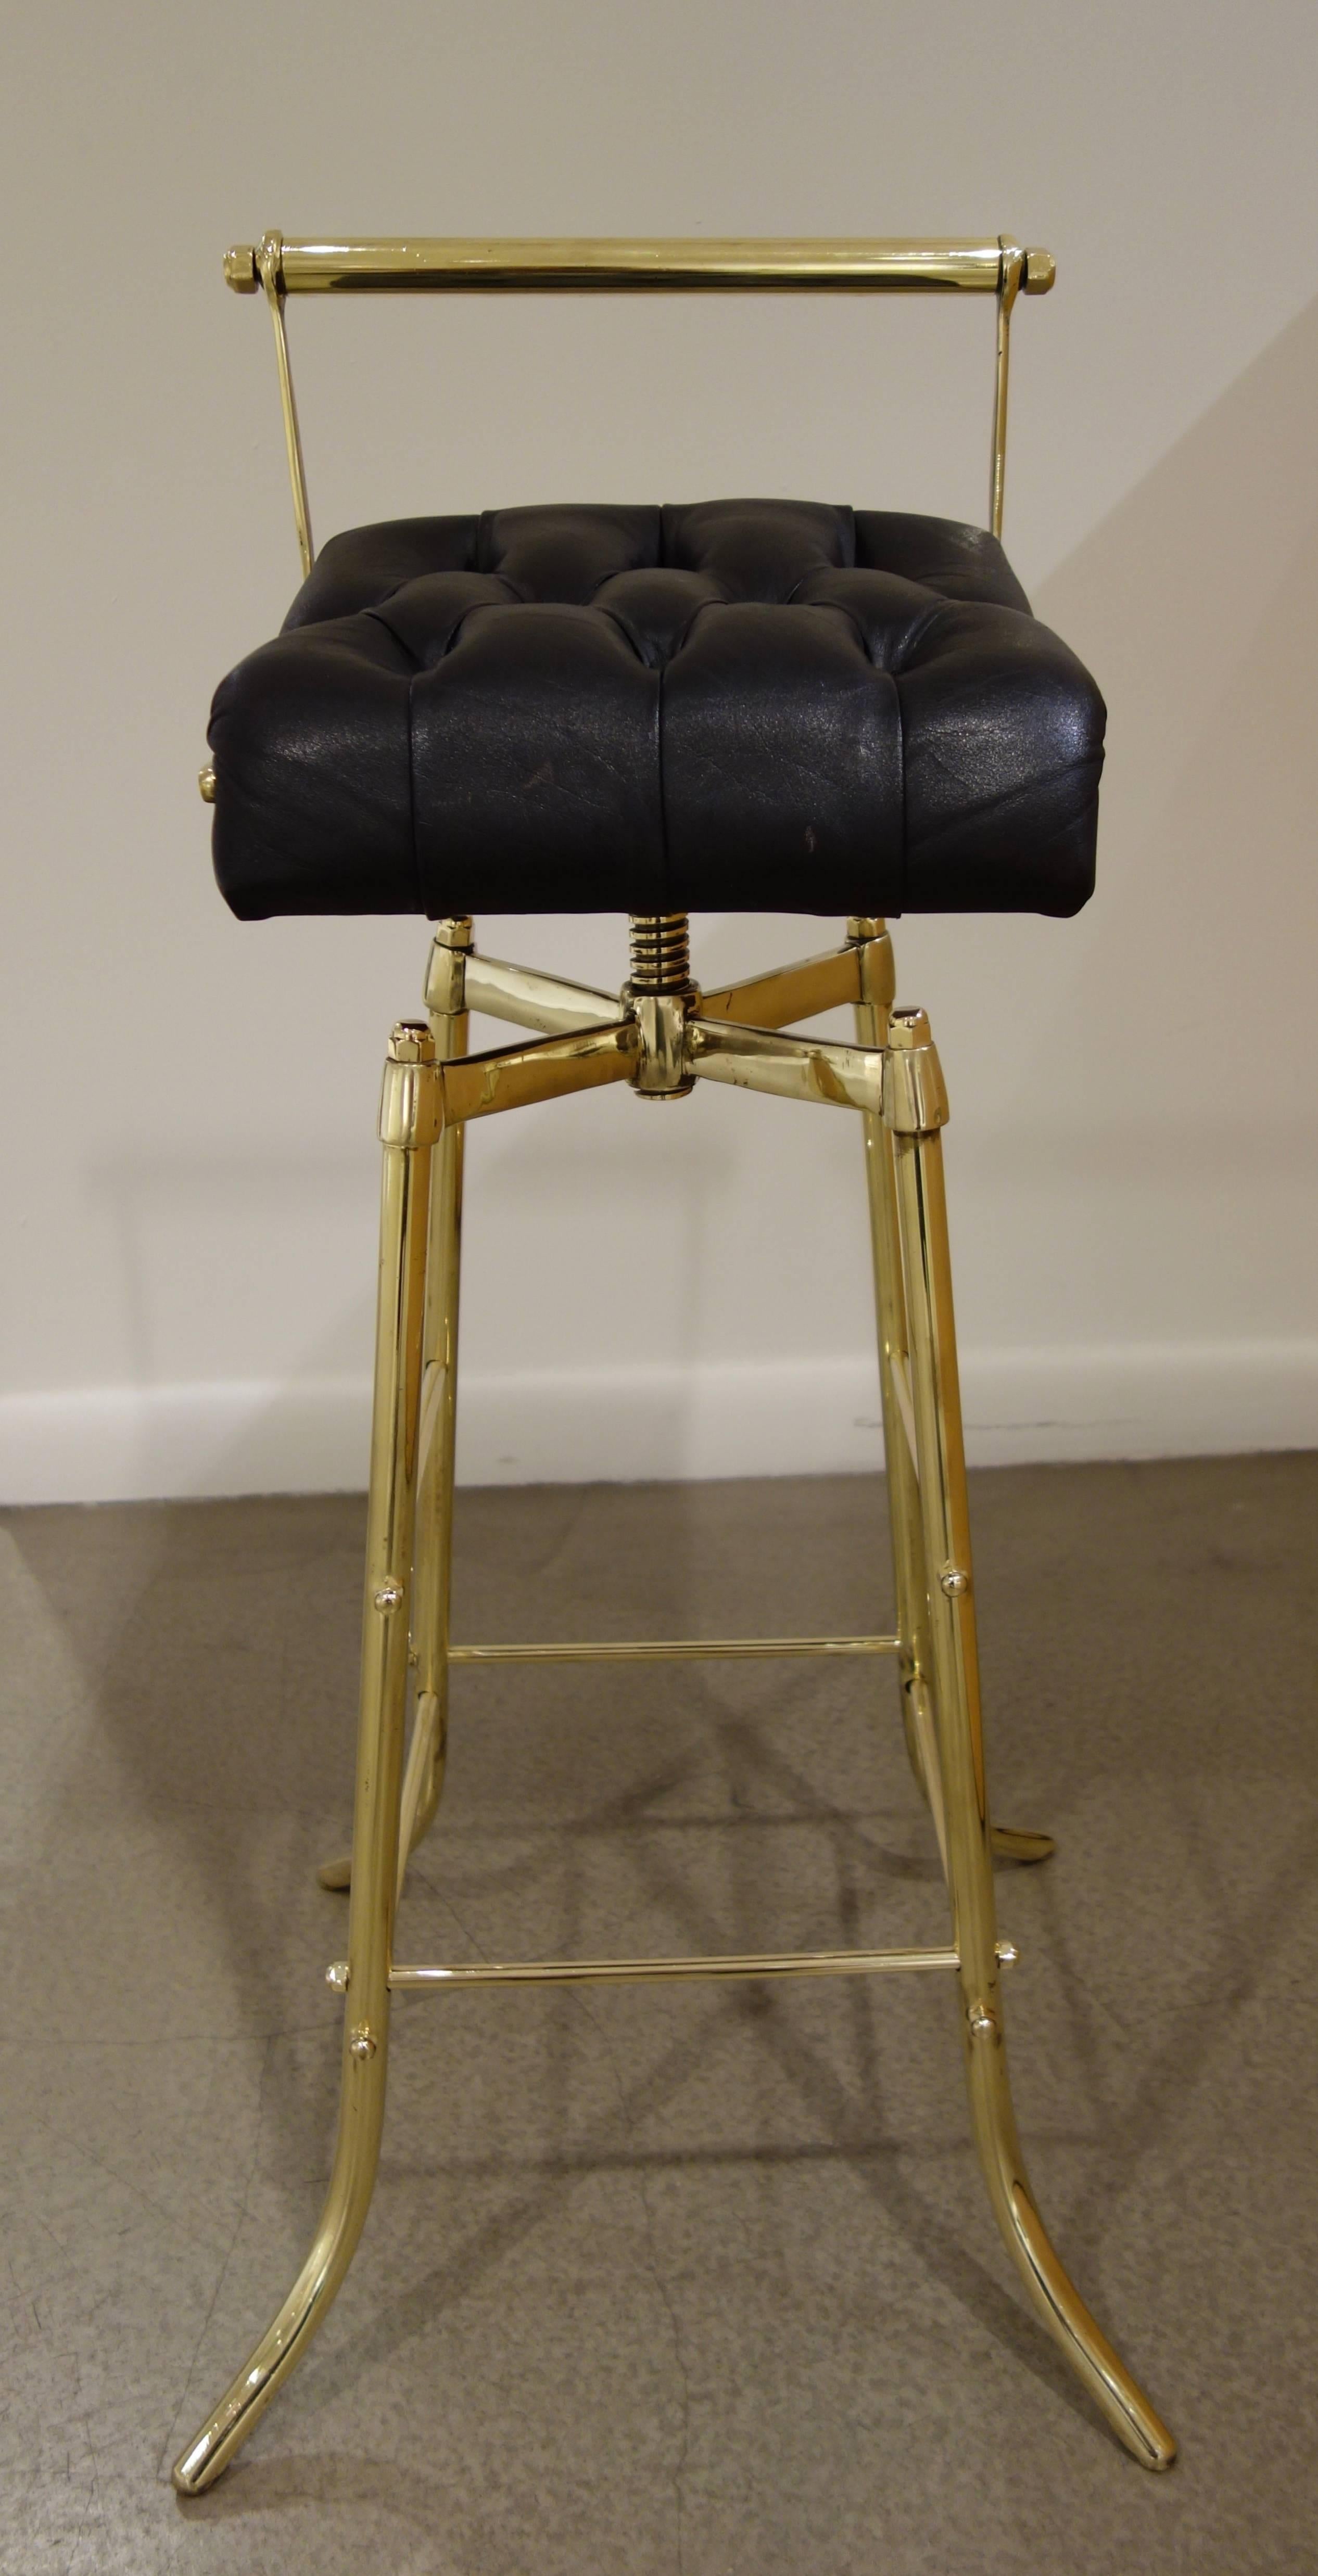 A set of three circa 1970s Italian brass bar stools with original, tufted black leather upholstery, the revolving seats resting on professionally polished, adjustable brass bases.